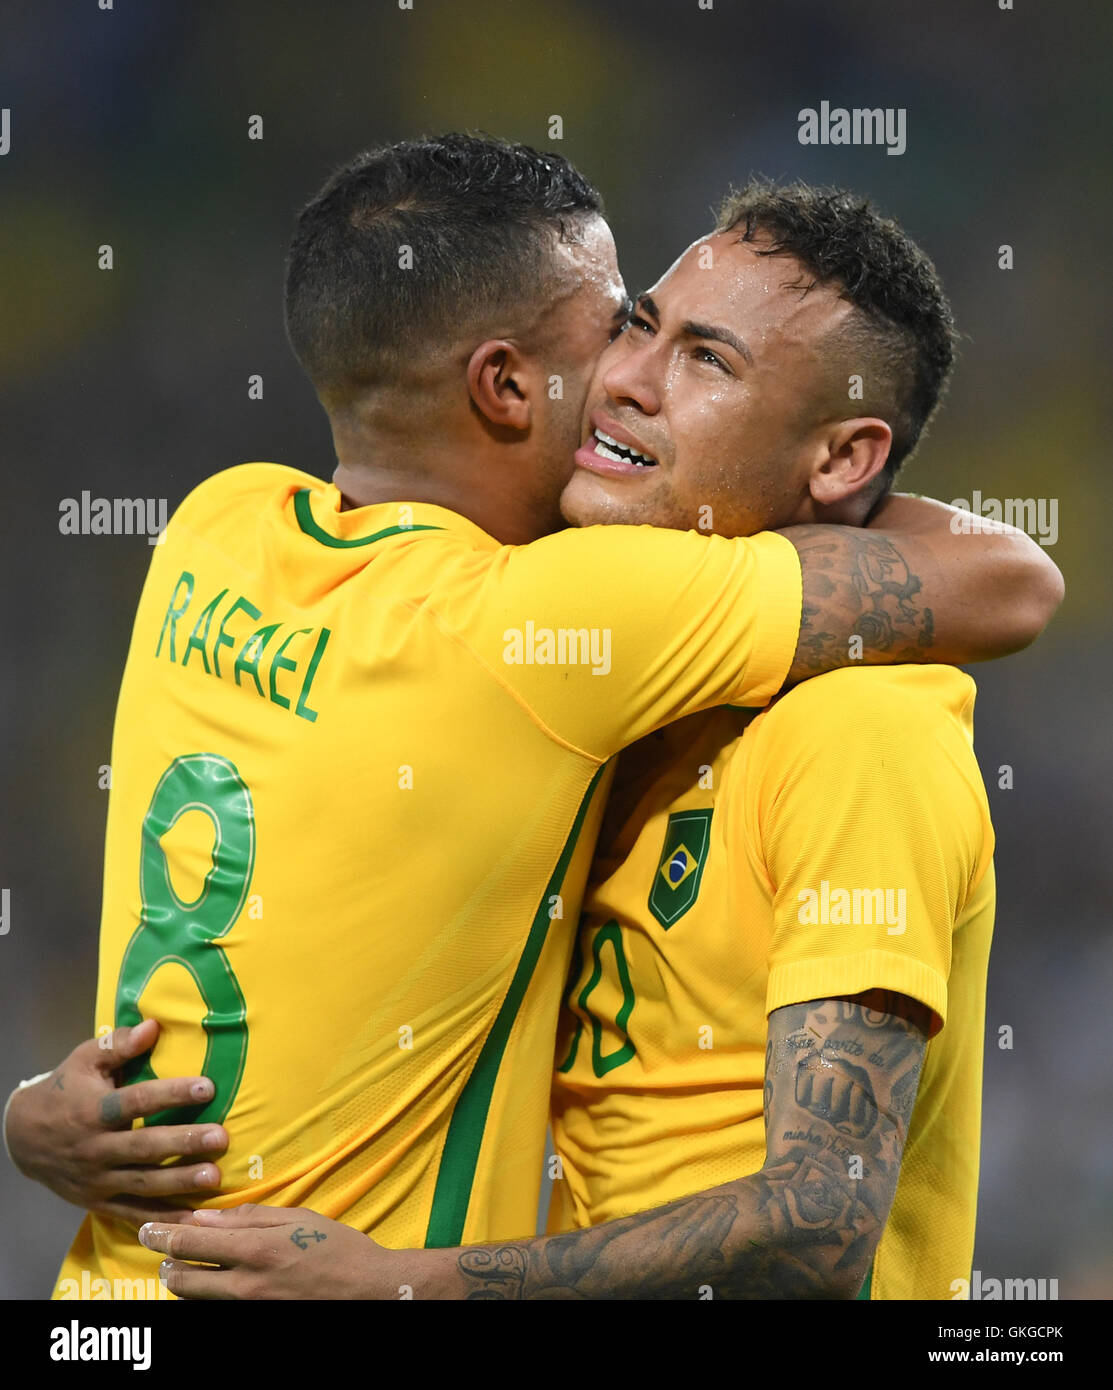 Rio De Janeiro, Brazil. 20th Aug, 2016. Brazil's Neymar (R) celebrates scoring during the men's football gold medal match against Germany at the 2016 Rio Olympic Games in Rio de Janeiro, Brazil, on Aug. 20, 2016. Brazil won the gold medal on penalty shoot-out. Credit:  Cheng Min/Xinhua/Alamy Live News Stock Photo